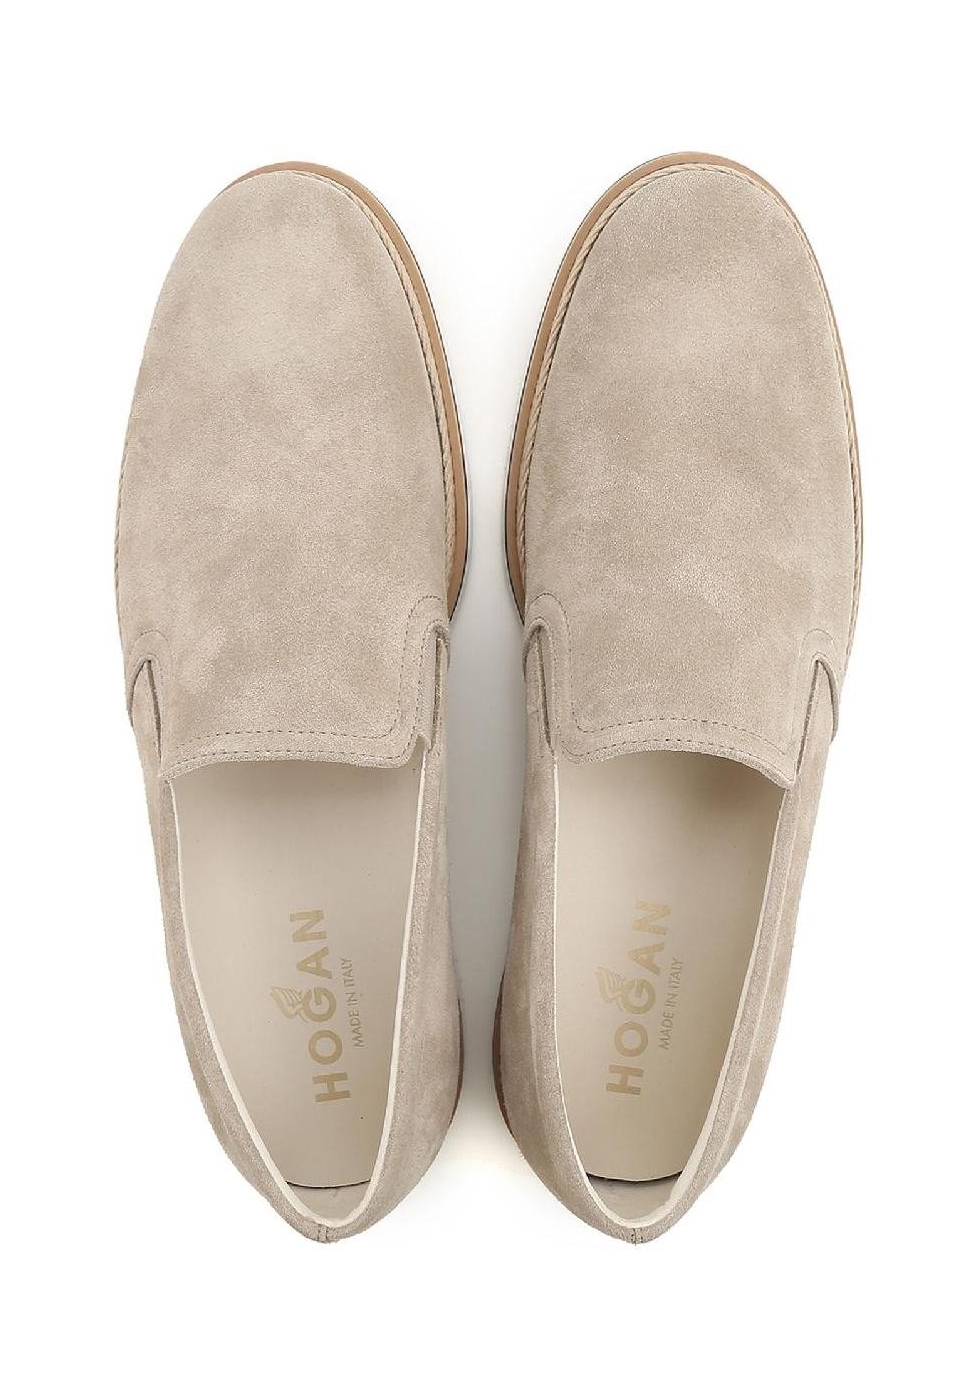 Hogan men's slip-ons loafers shoes in 